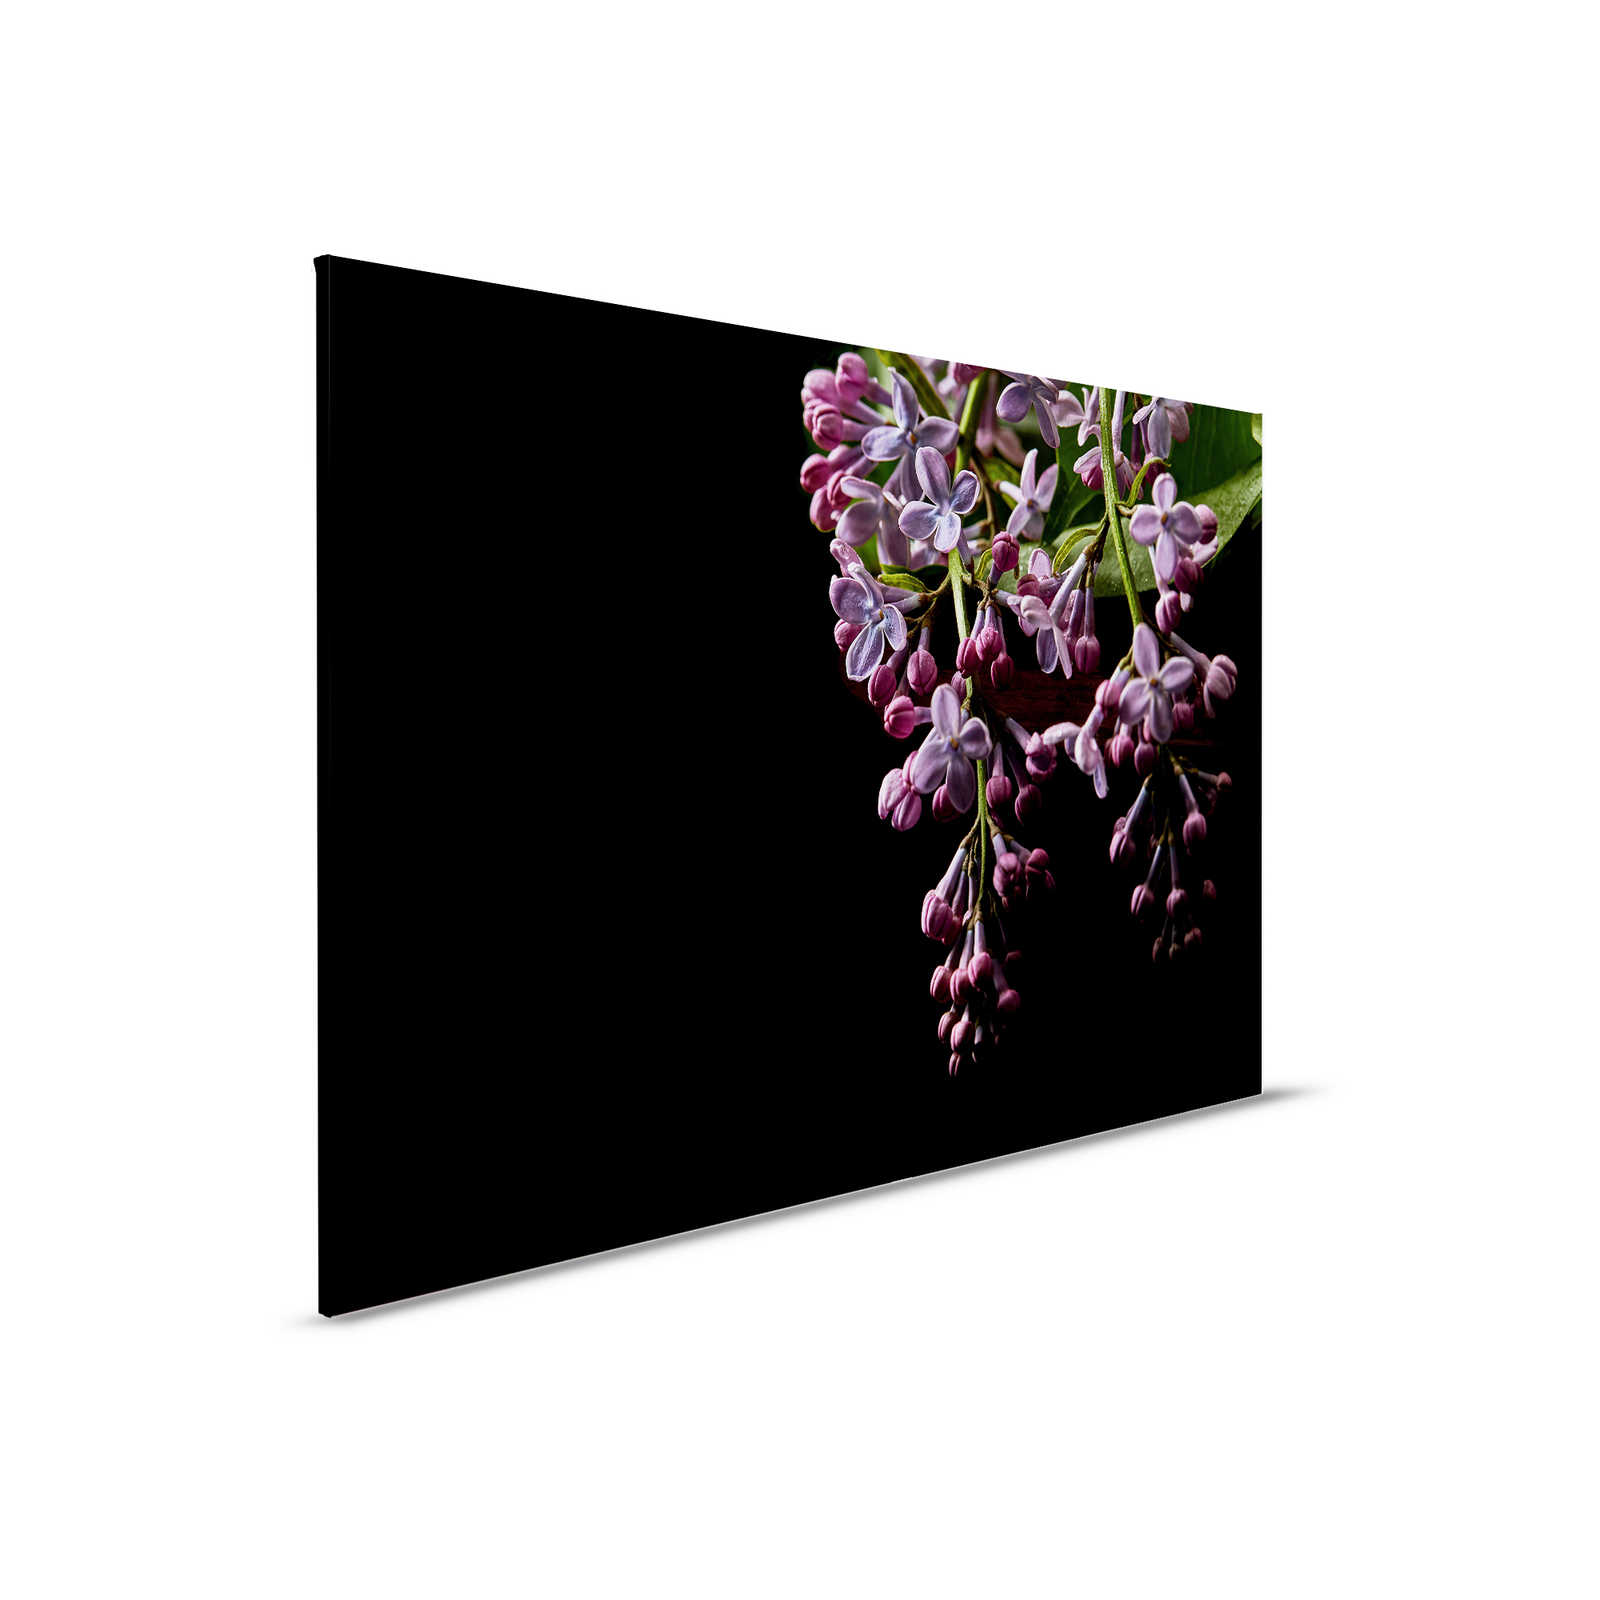         Canvas painting Flowers on black background Close-Up - 0,90 m x 0,60 m
    